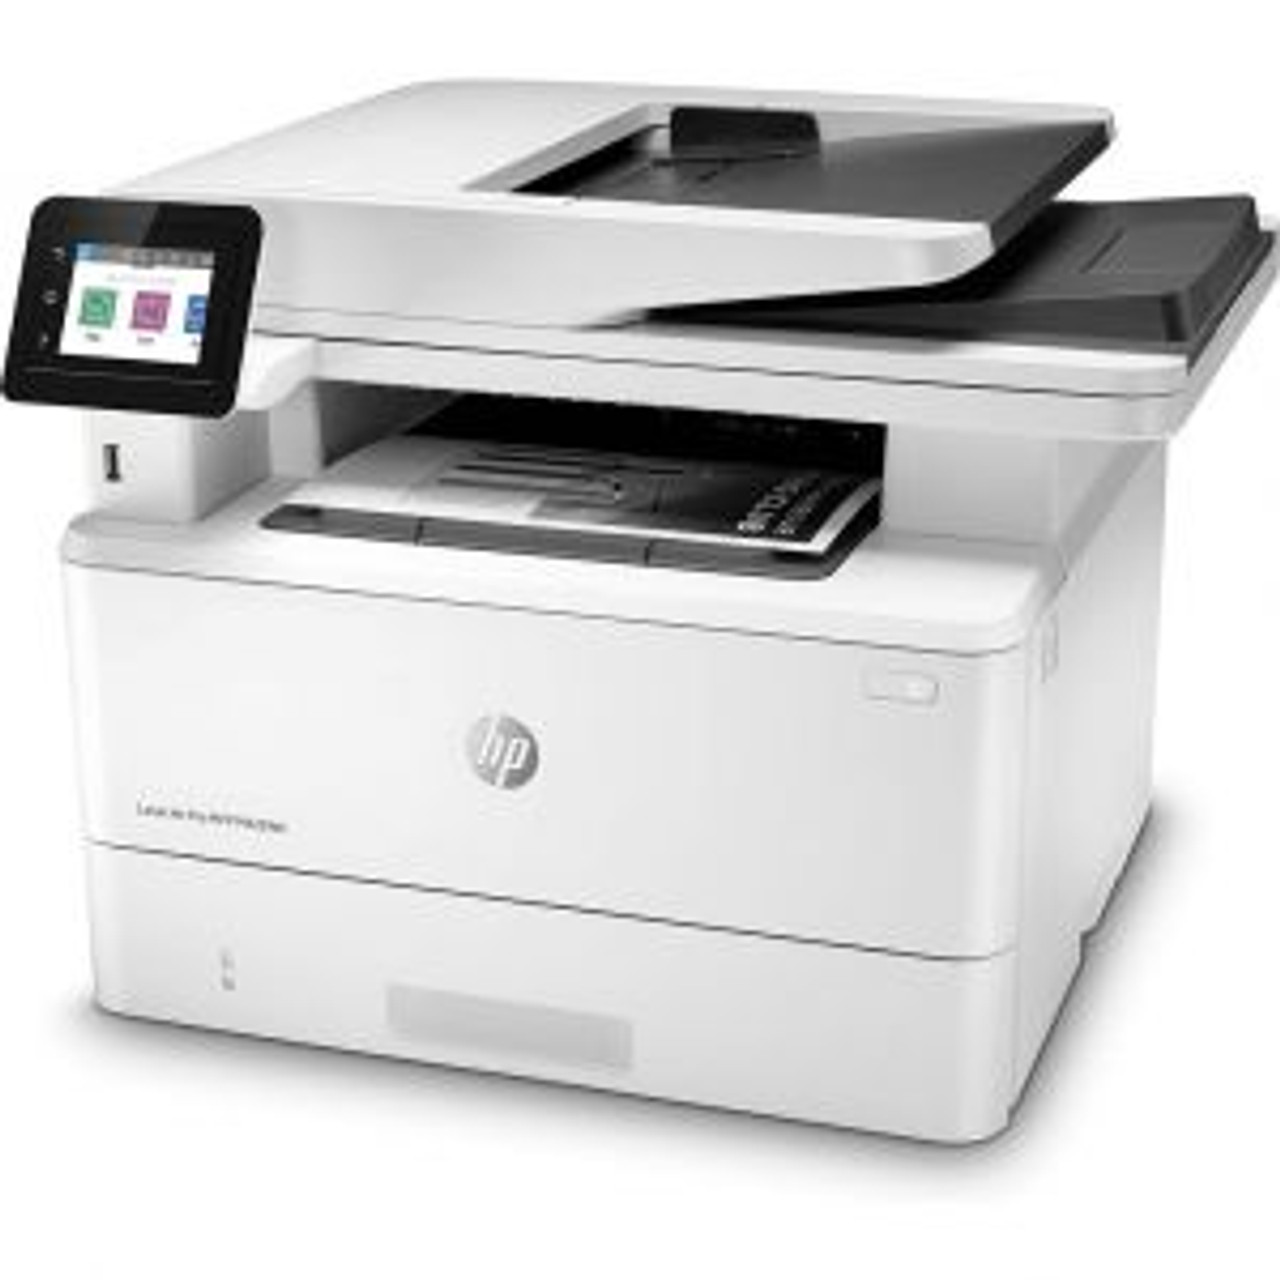 W1A29A HP LaserJet Pro MFP M428fdn Black-and-White All-